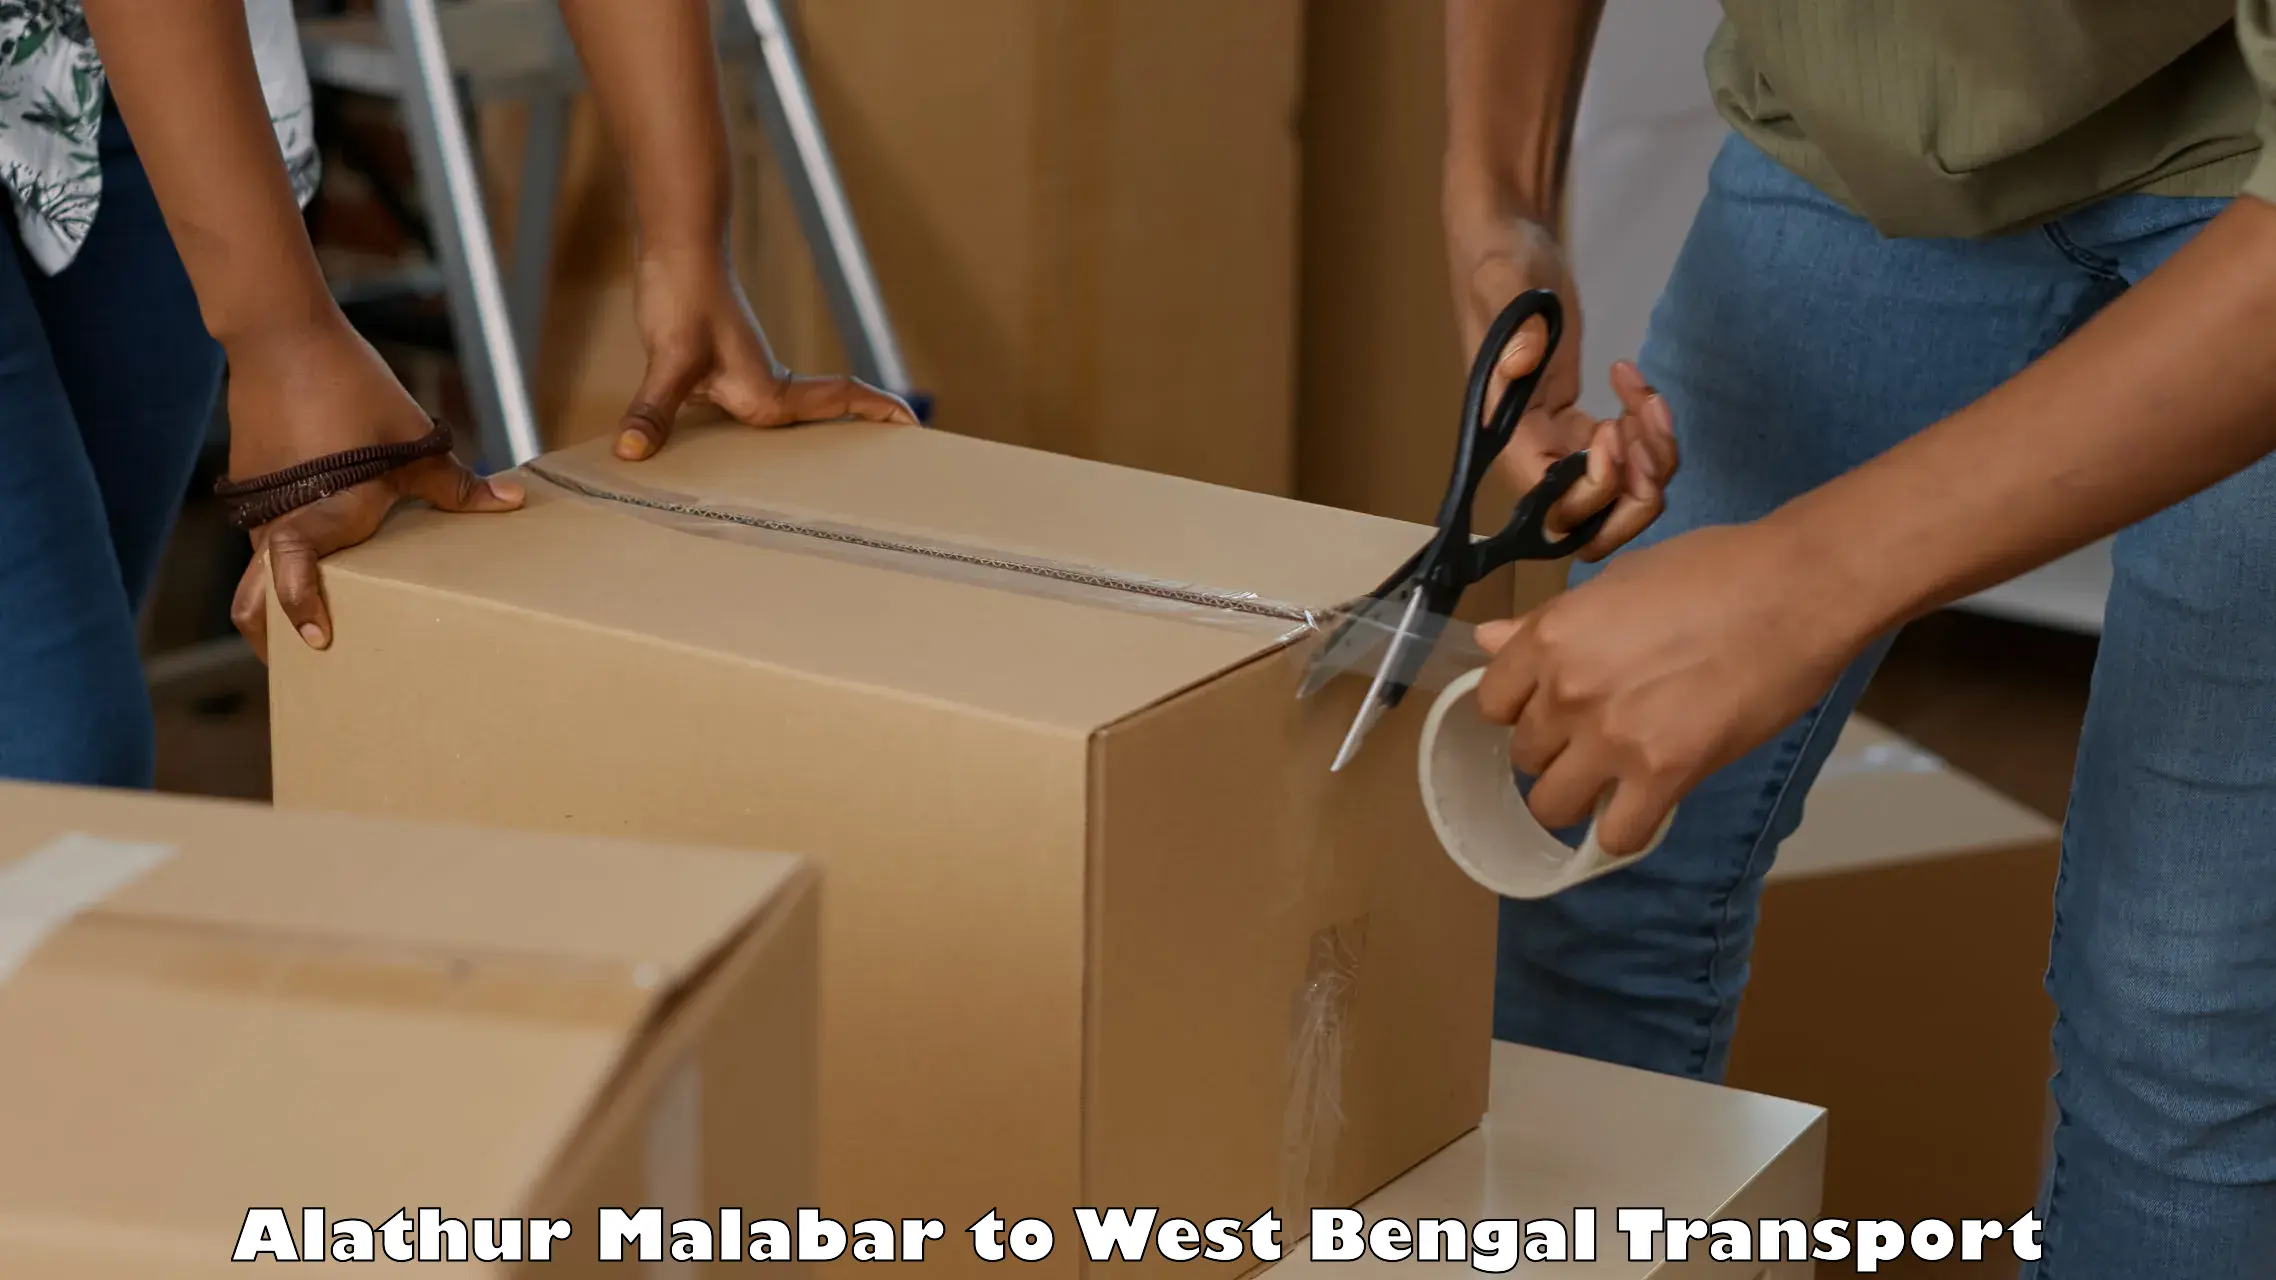 Best transport services in India Alathur Malabar to IIT Kharagpur